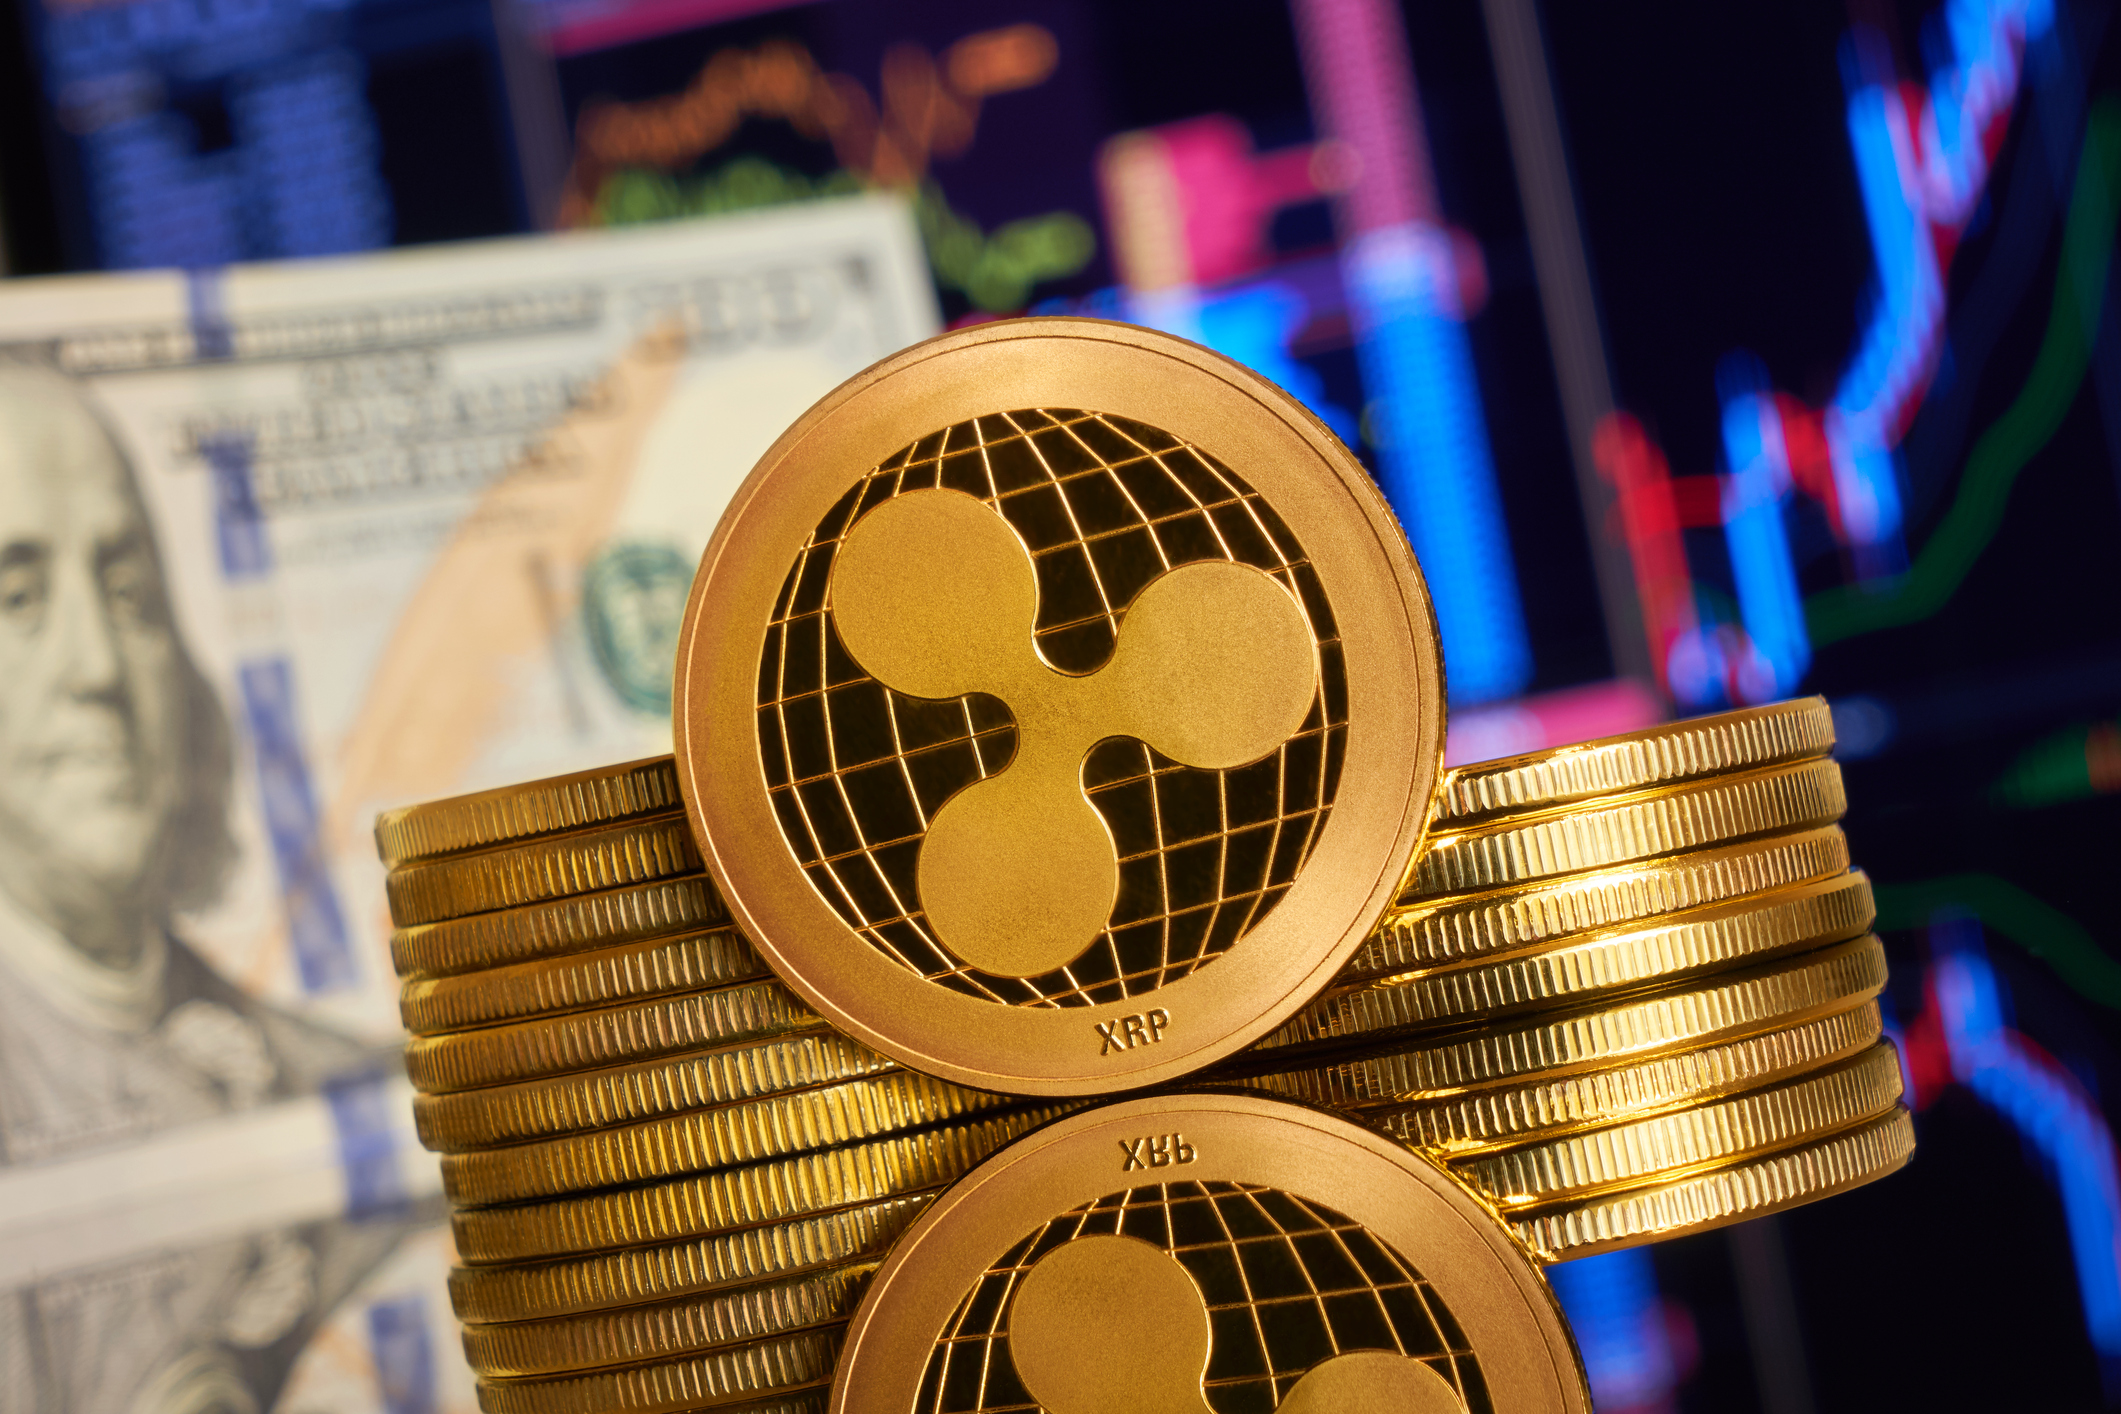 XRP Price Set Theory Debunked, Here’s What It’s About